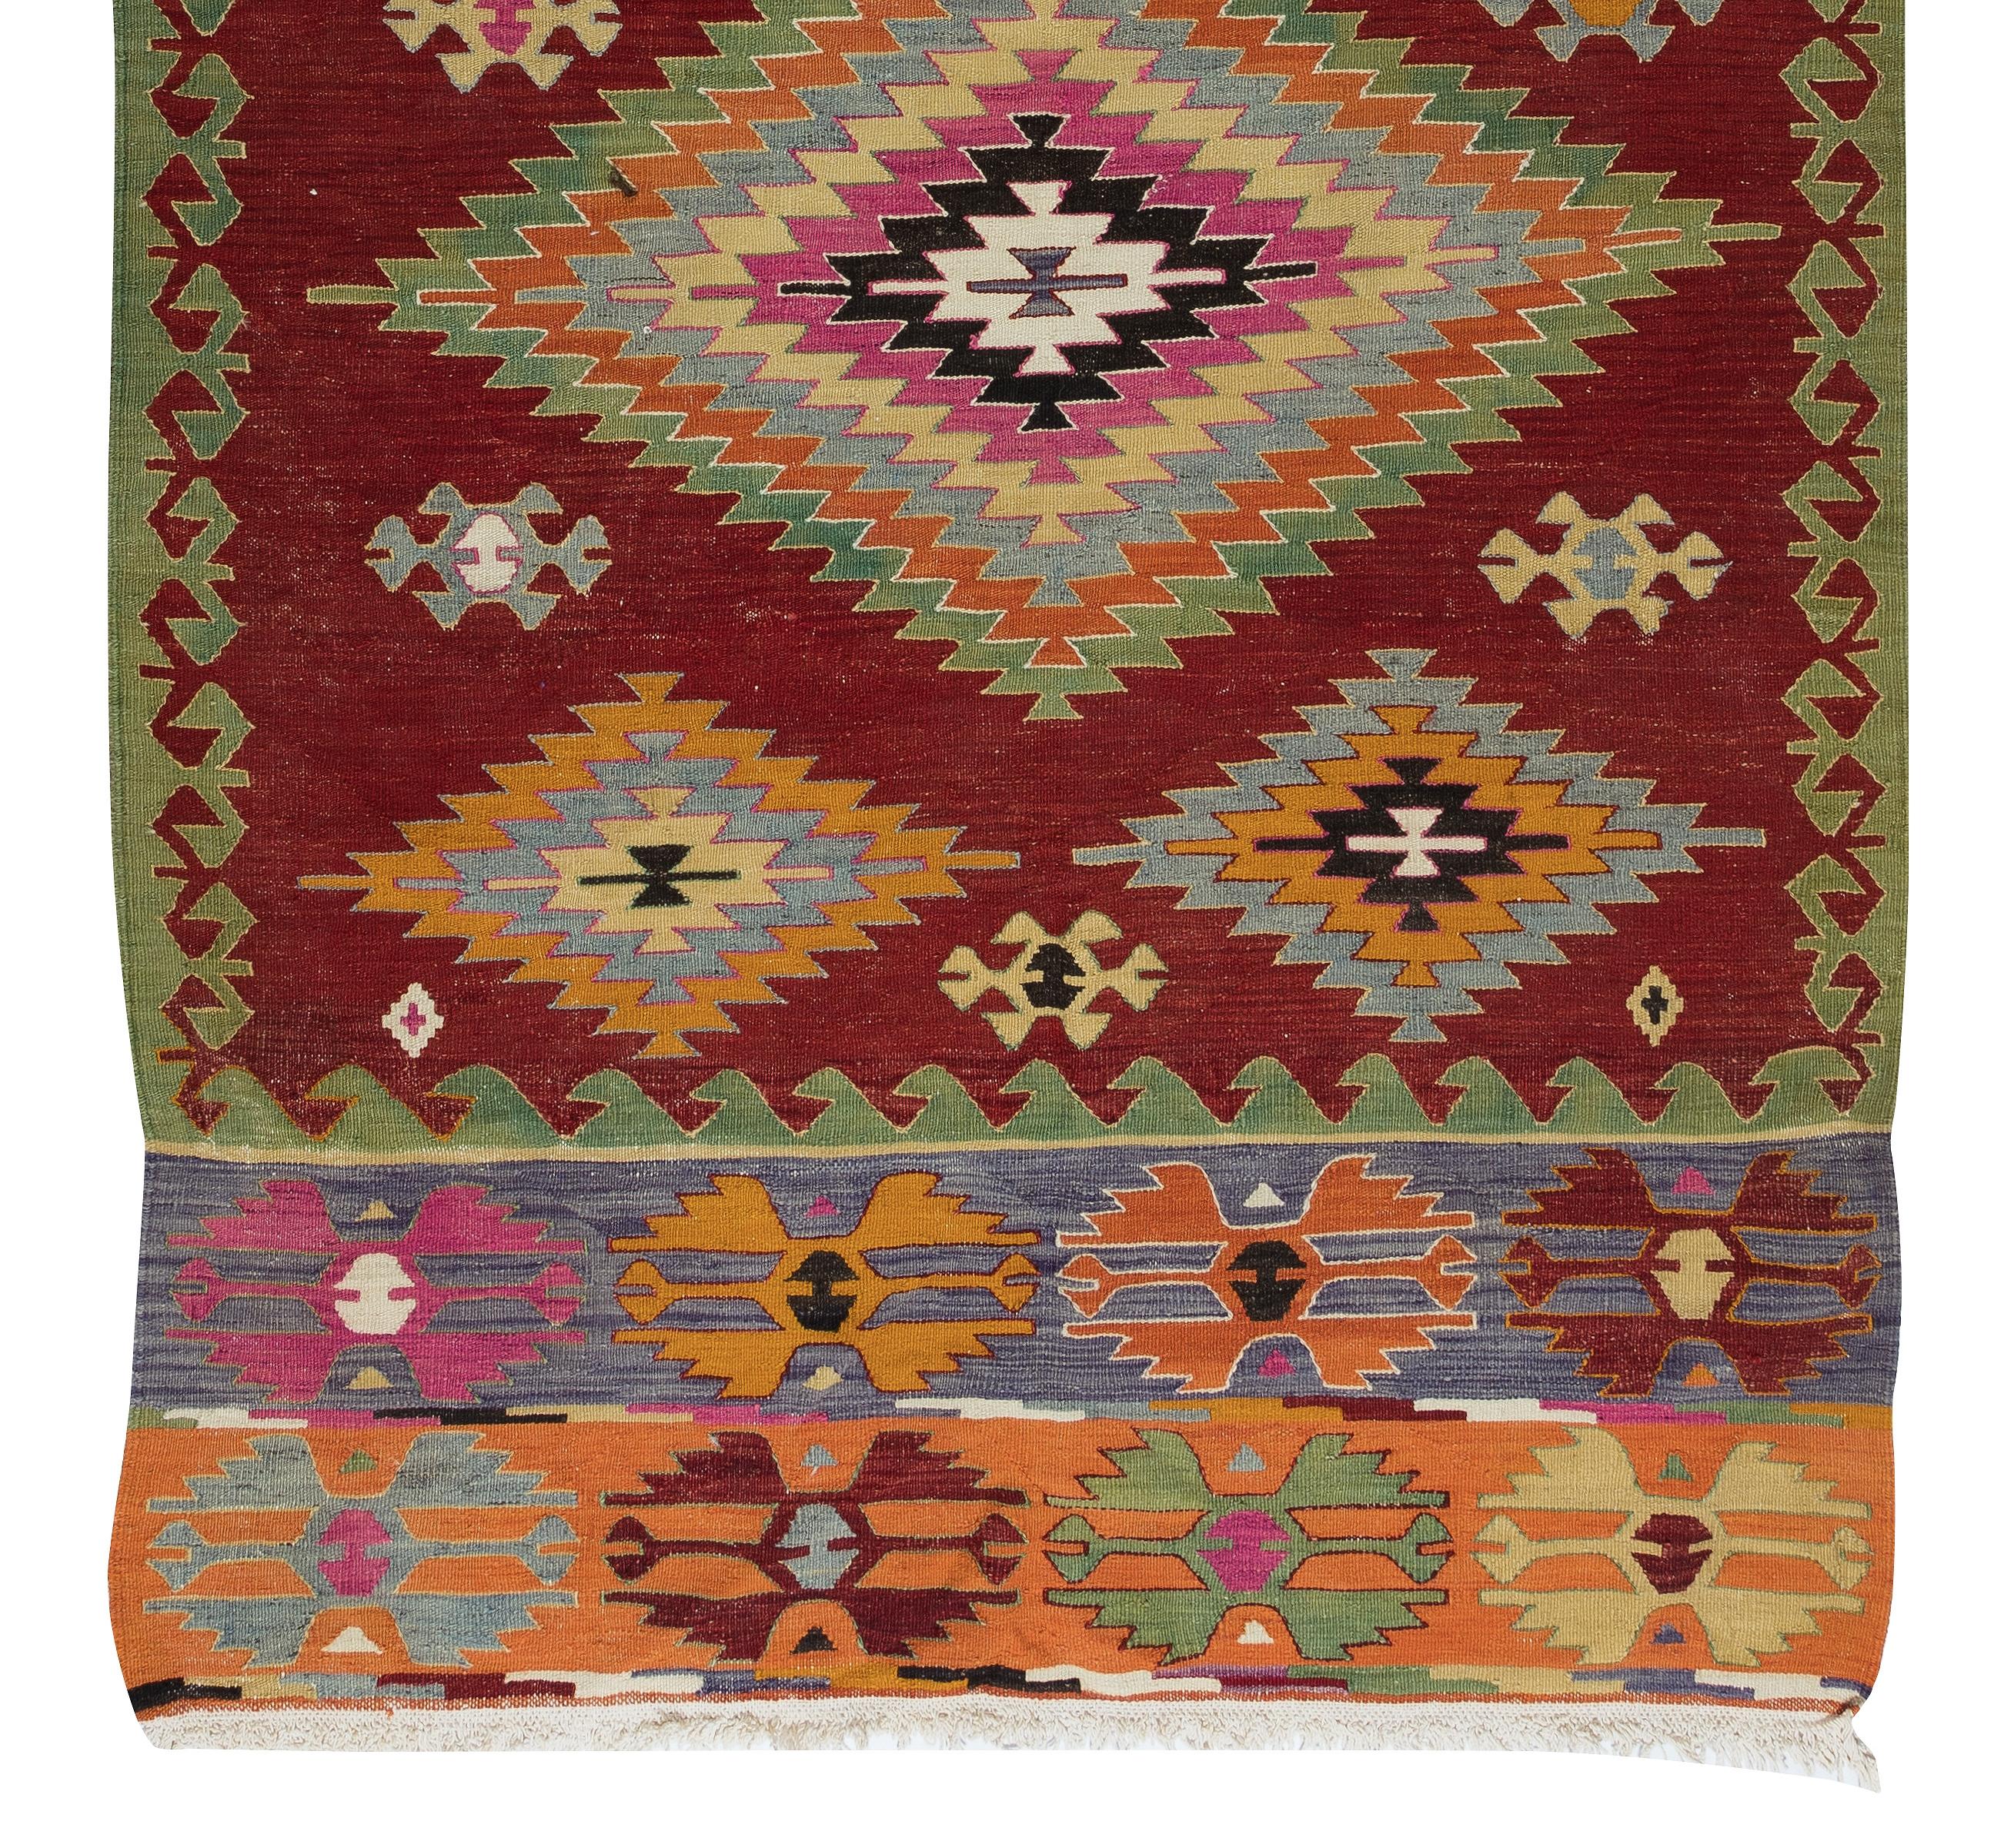 20th Century 5x9.6 Ft Hand-Woven Geometric Vintage Kilim From Turkey, 100% Wool, Colorful Rug For Sale